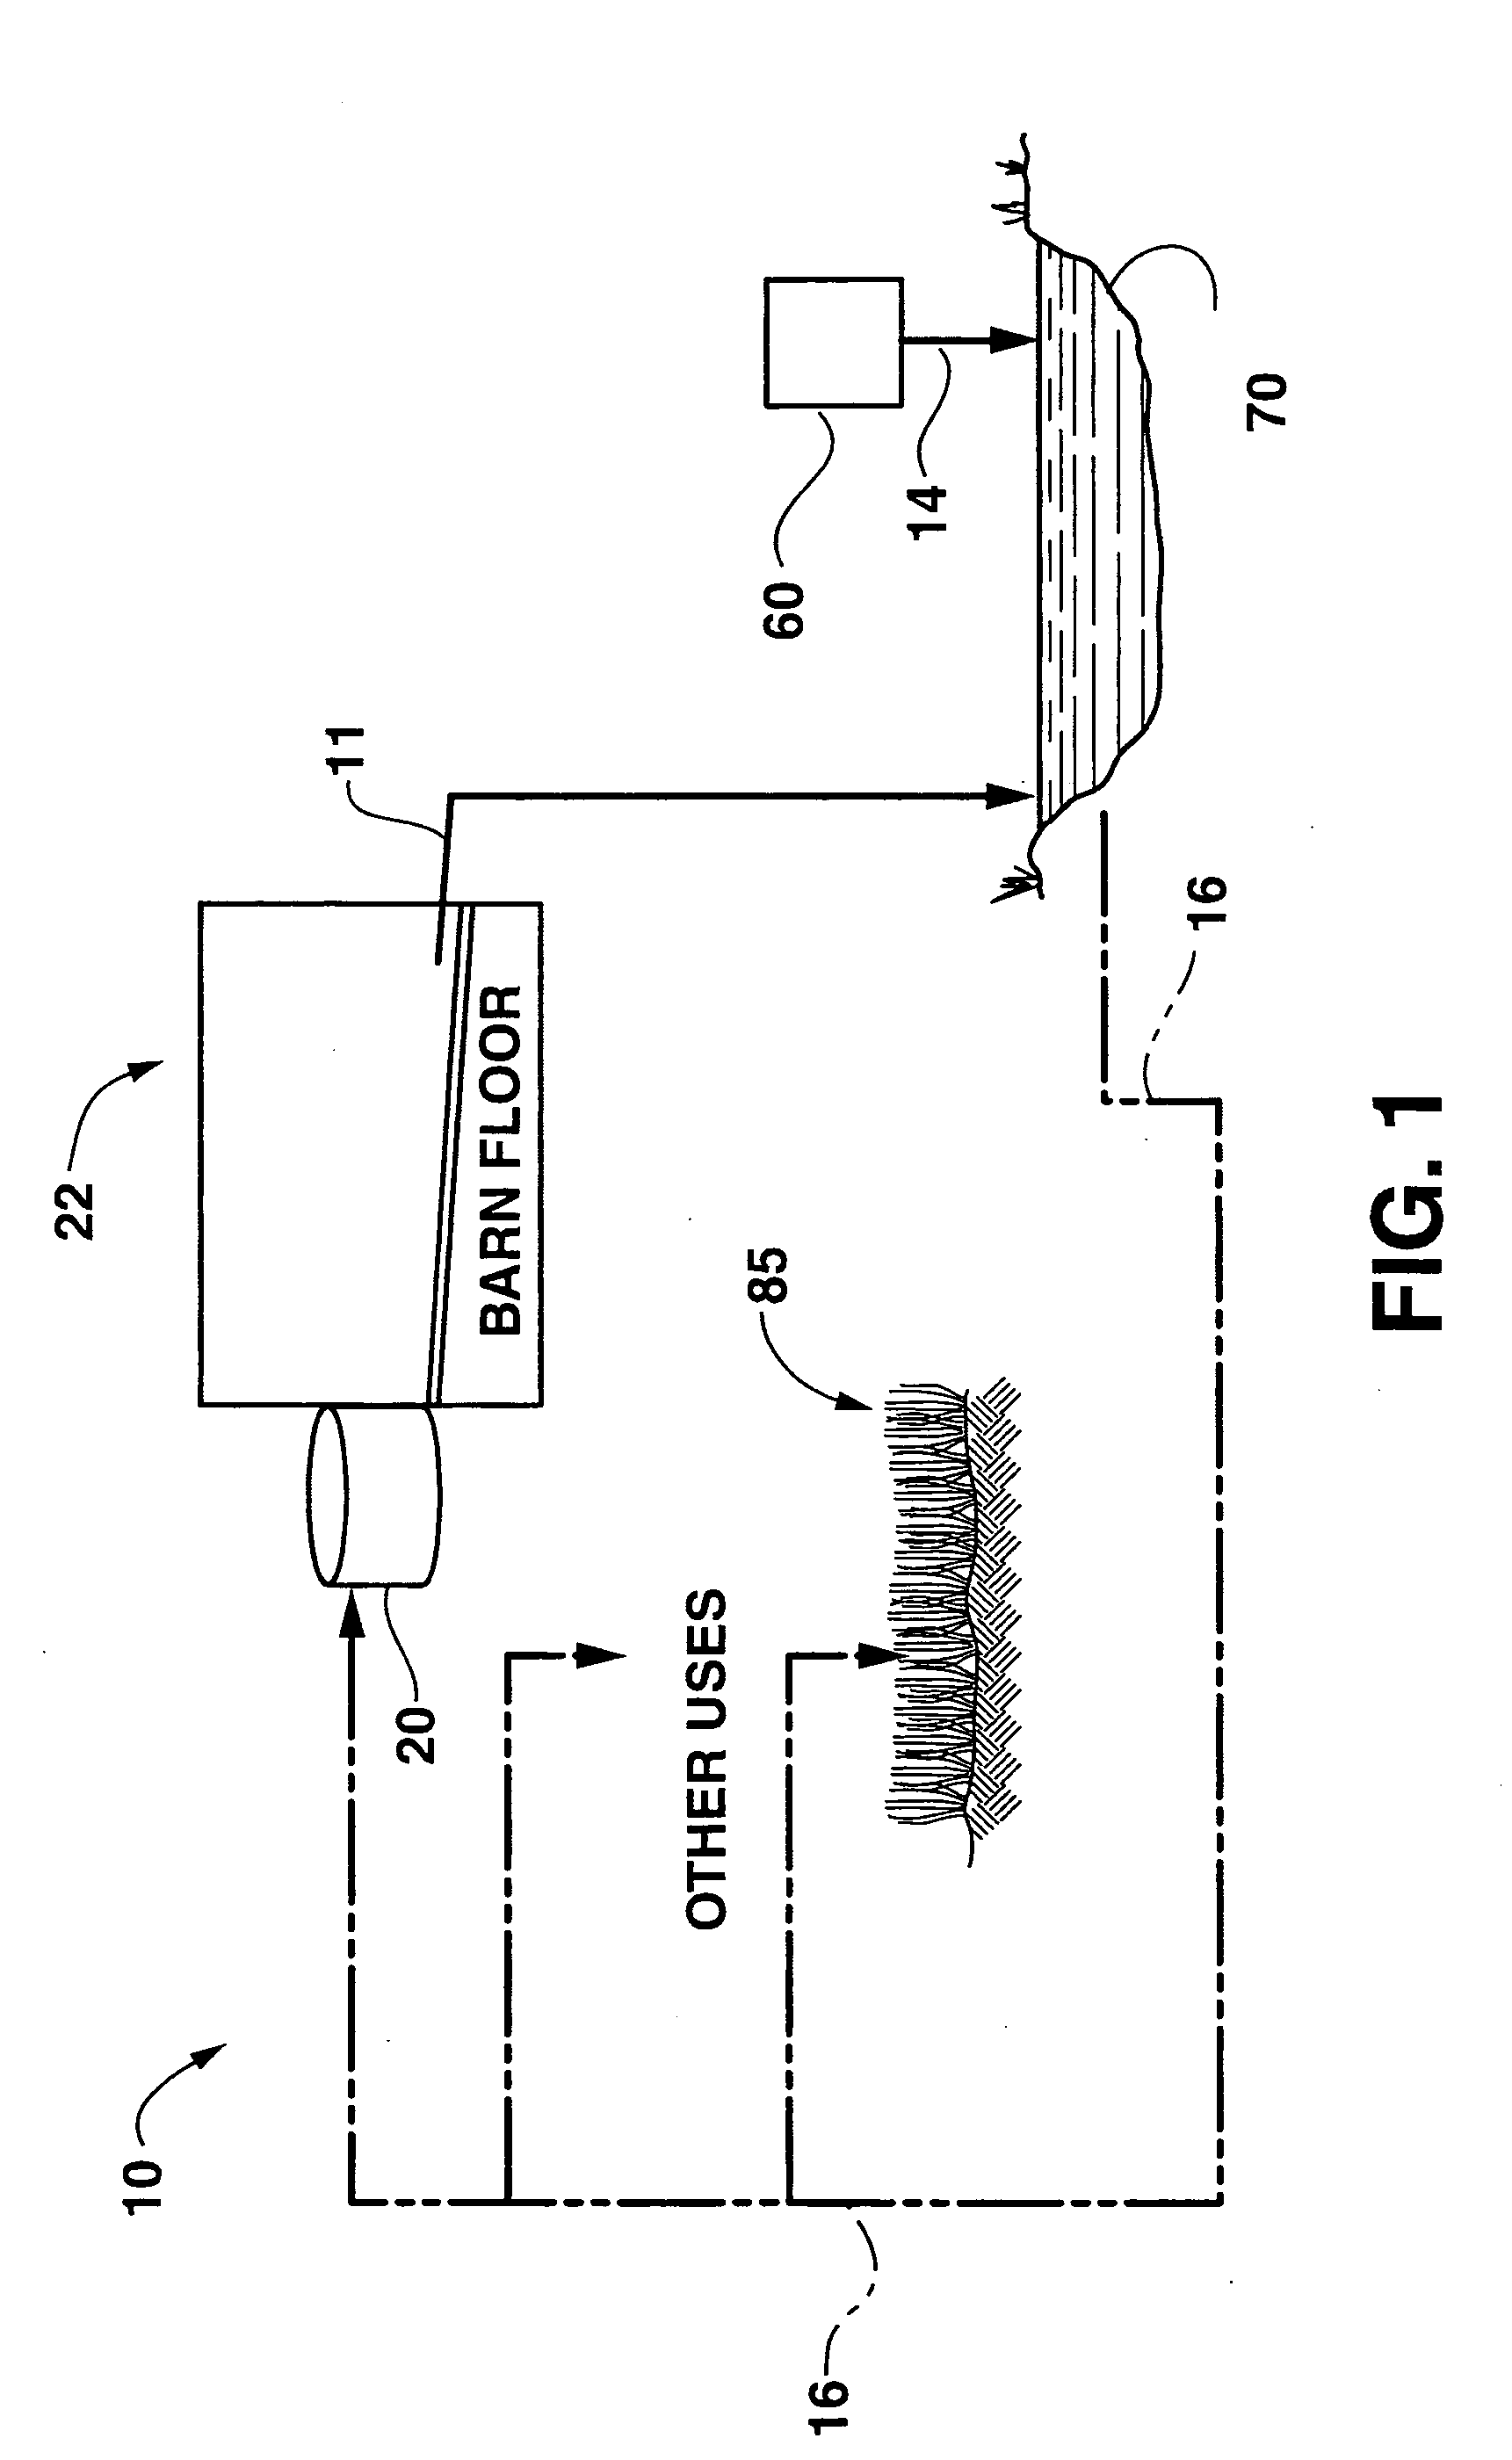 Carbonaceous waste treatment system and method